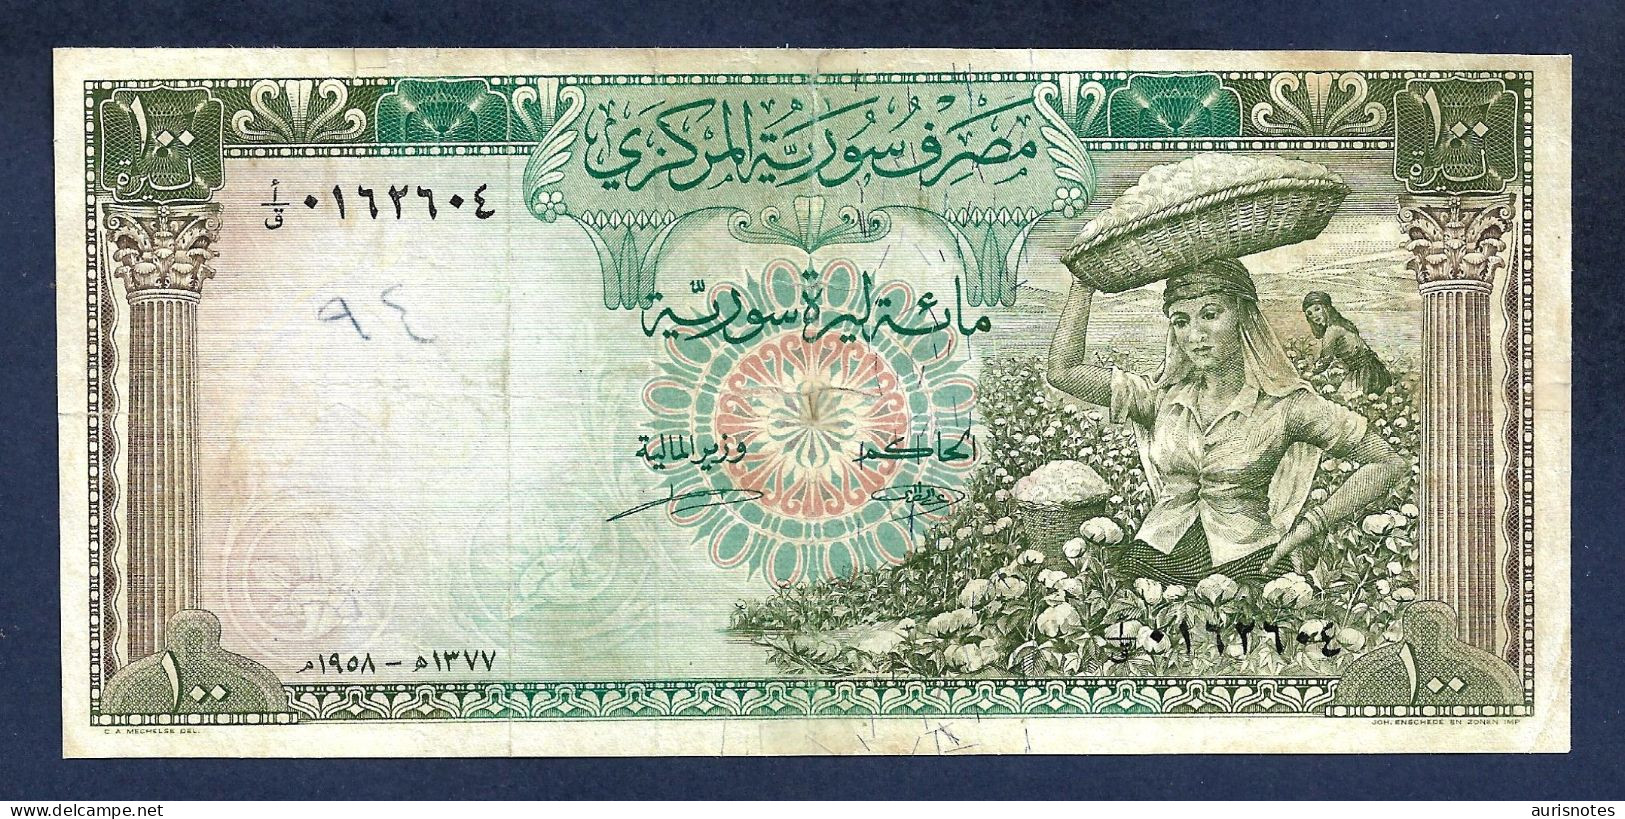 Syria 100 Pounds 1958 P91a First Issue Scarce Fine/VF - Syrien